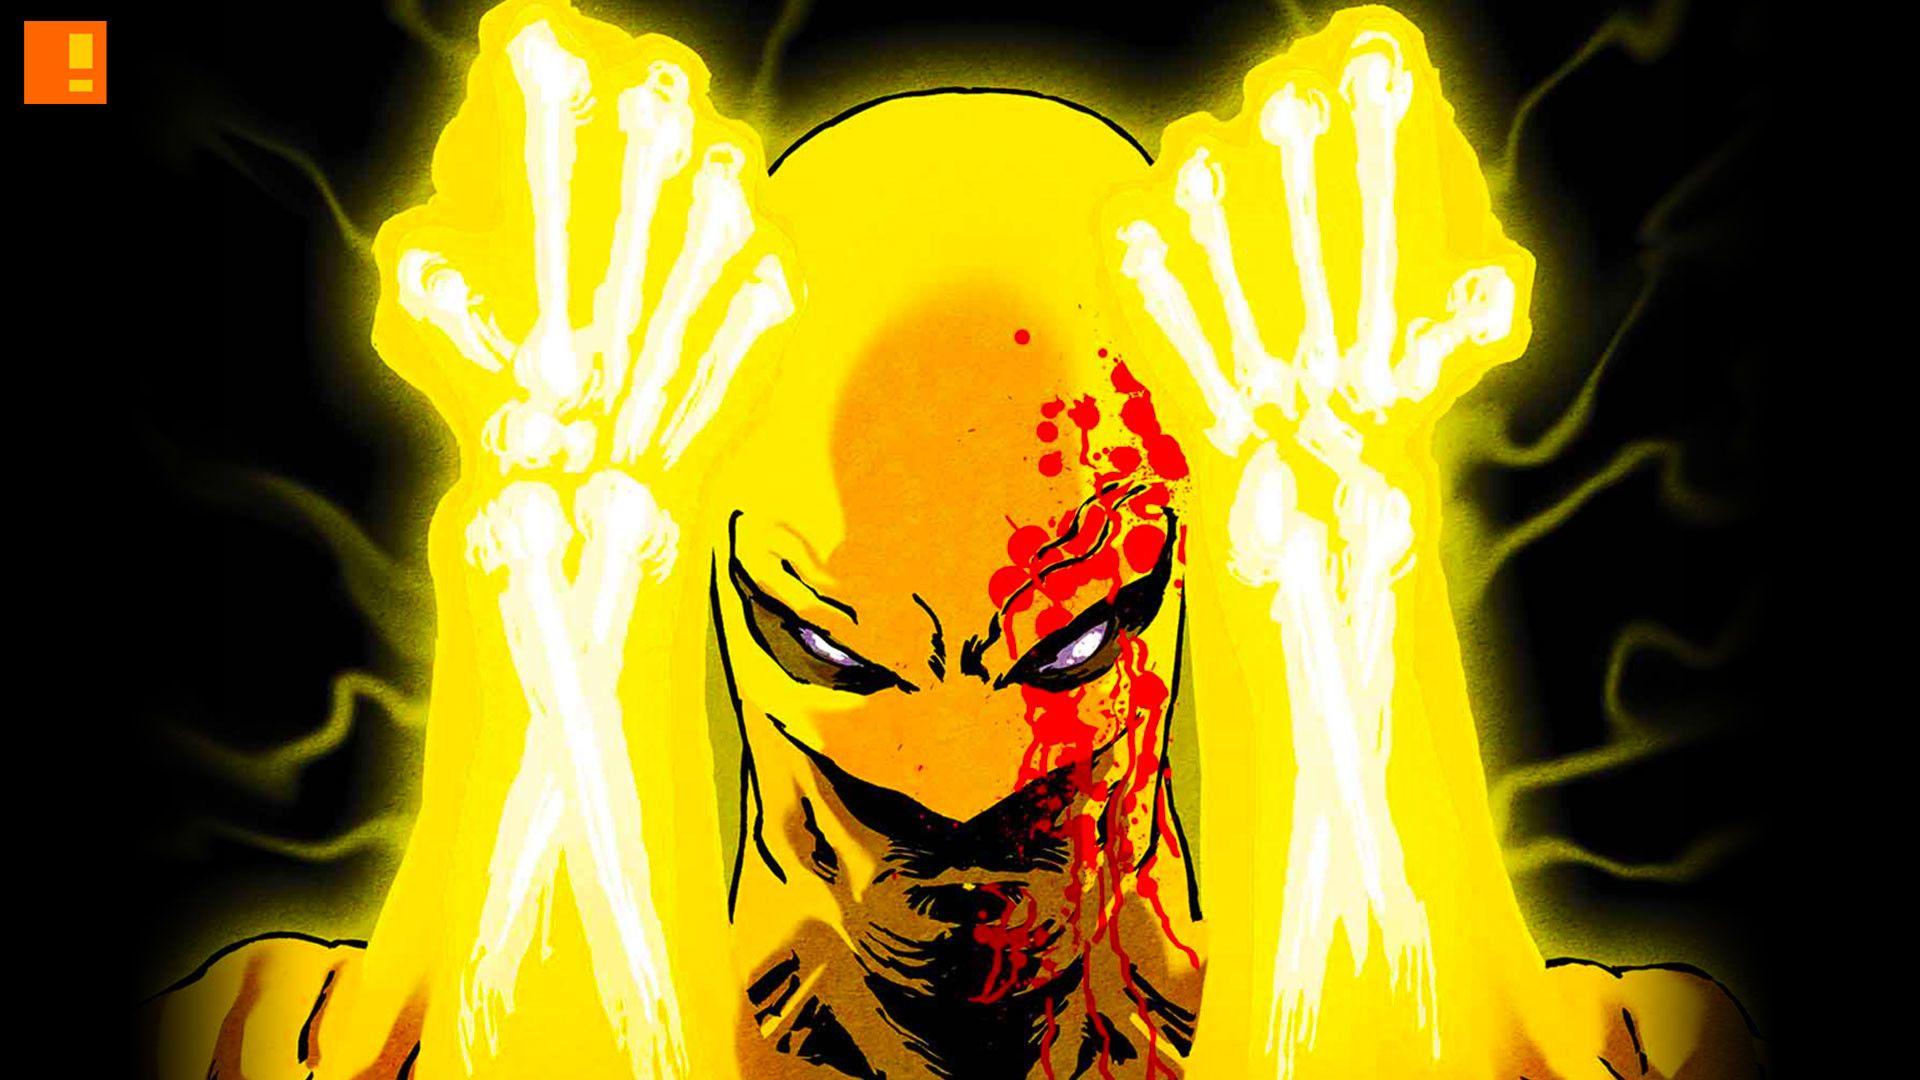 1080x1920  1080x1920 iron fist hd tv shows for Iphone 6 7 8 wallpaper   Coolwallpapersme